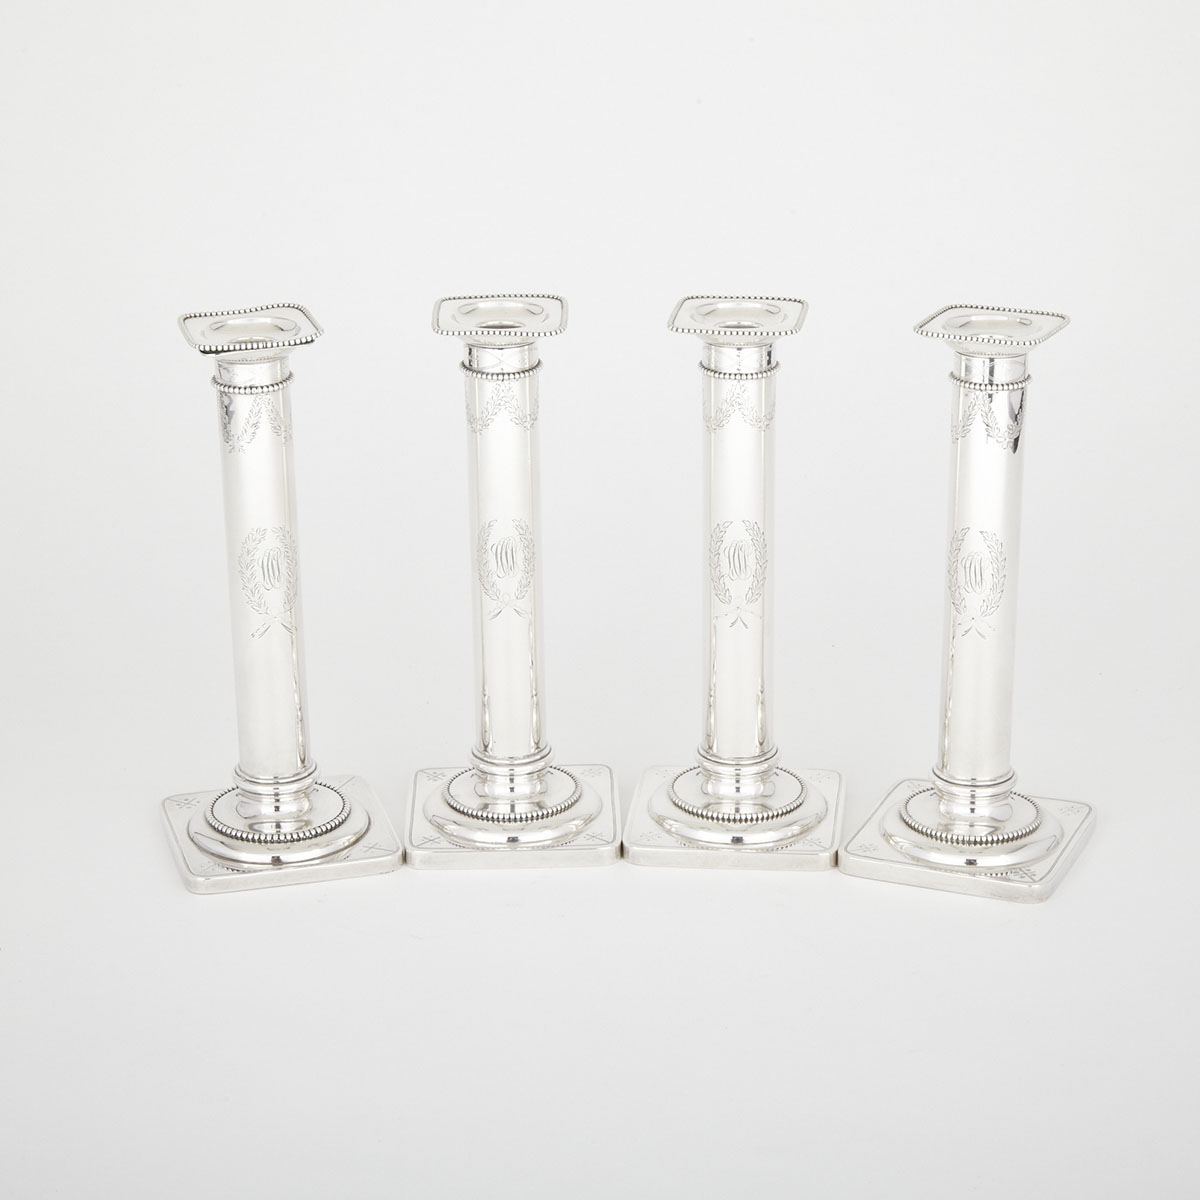 Four American Silver Table Candlesticks, William B. Durgin Co., Concord, N.H., early 20th century